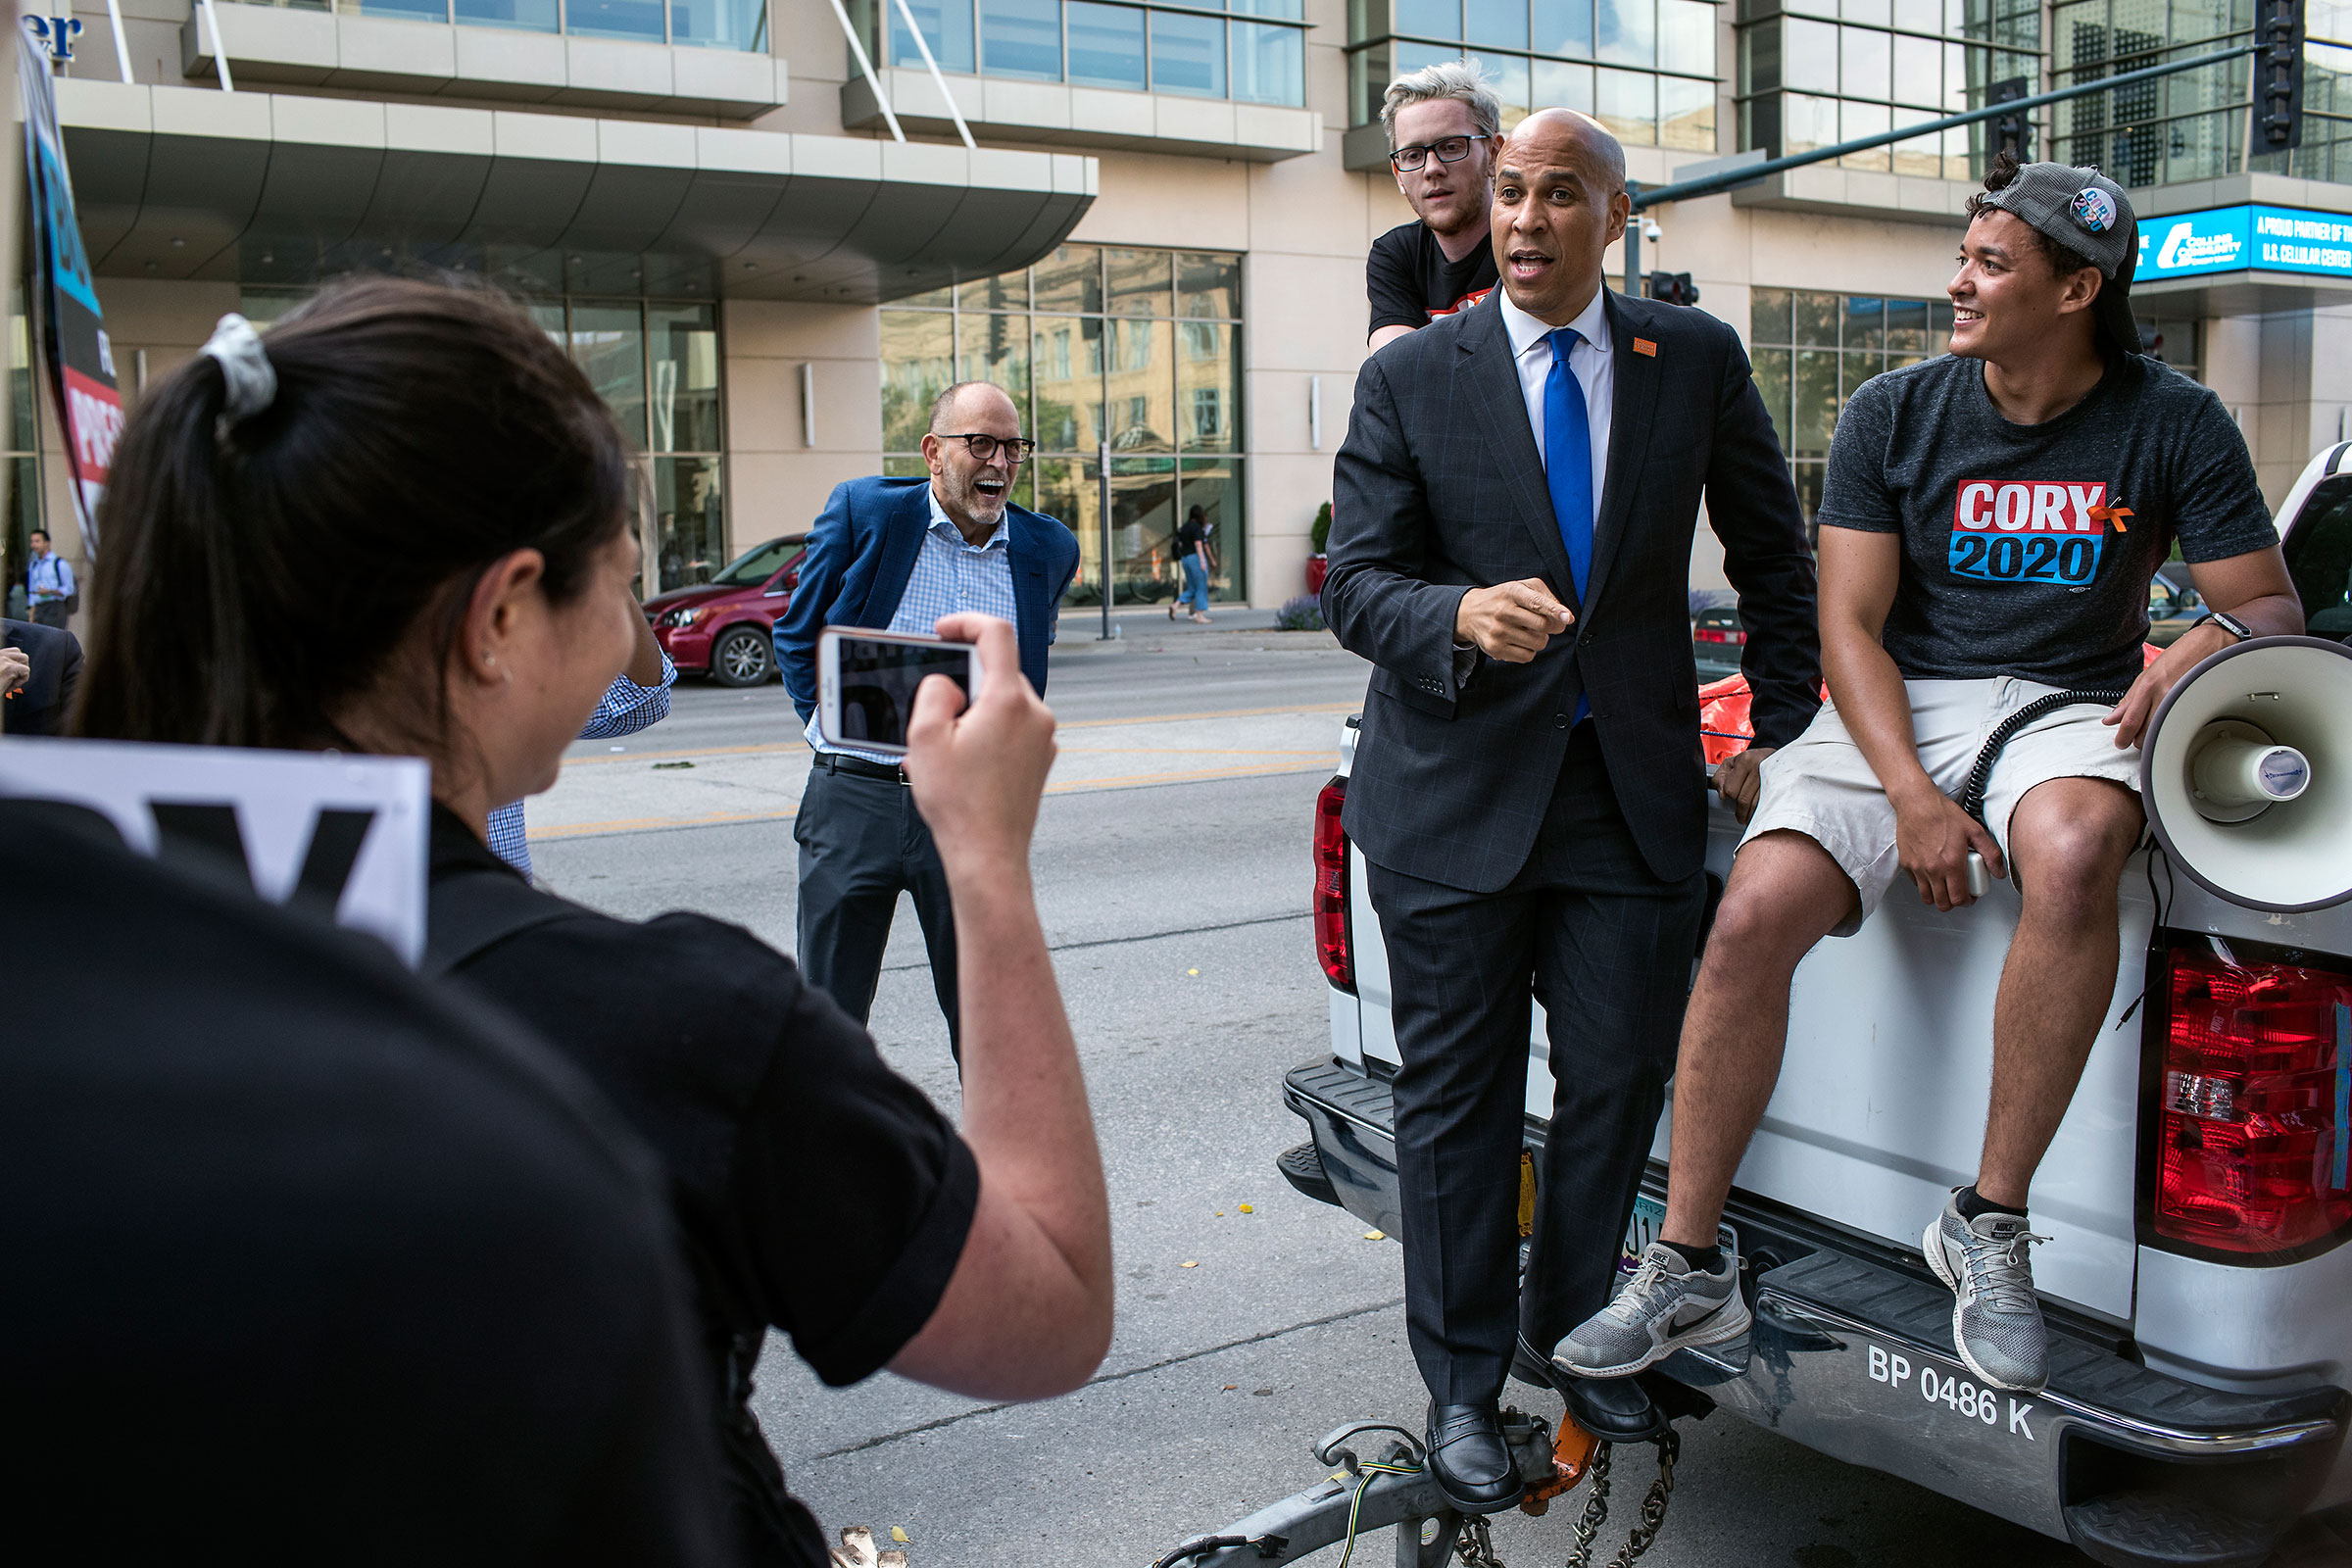 Booker speaks with supporters after the Democratic Hall of Fame event in Cedar Rapids, Iowa on June 9. (Danny Wilcox Frazier—VII for TIME)